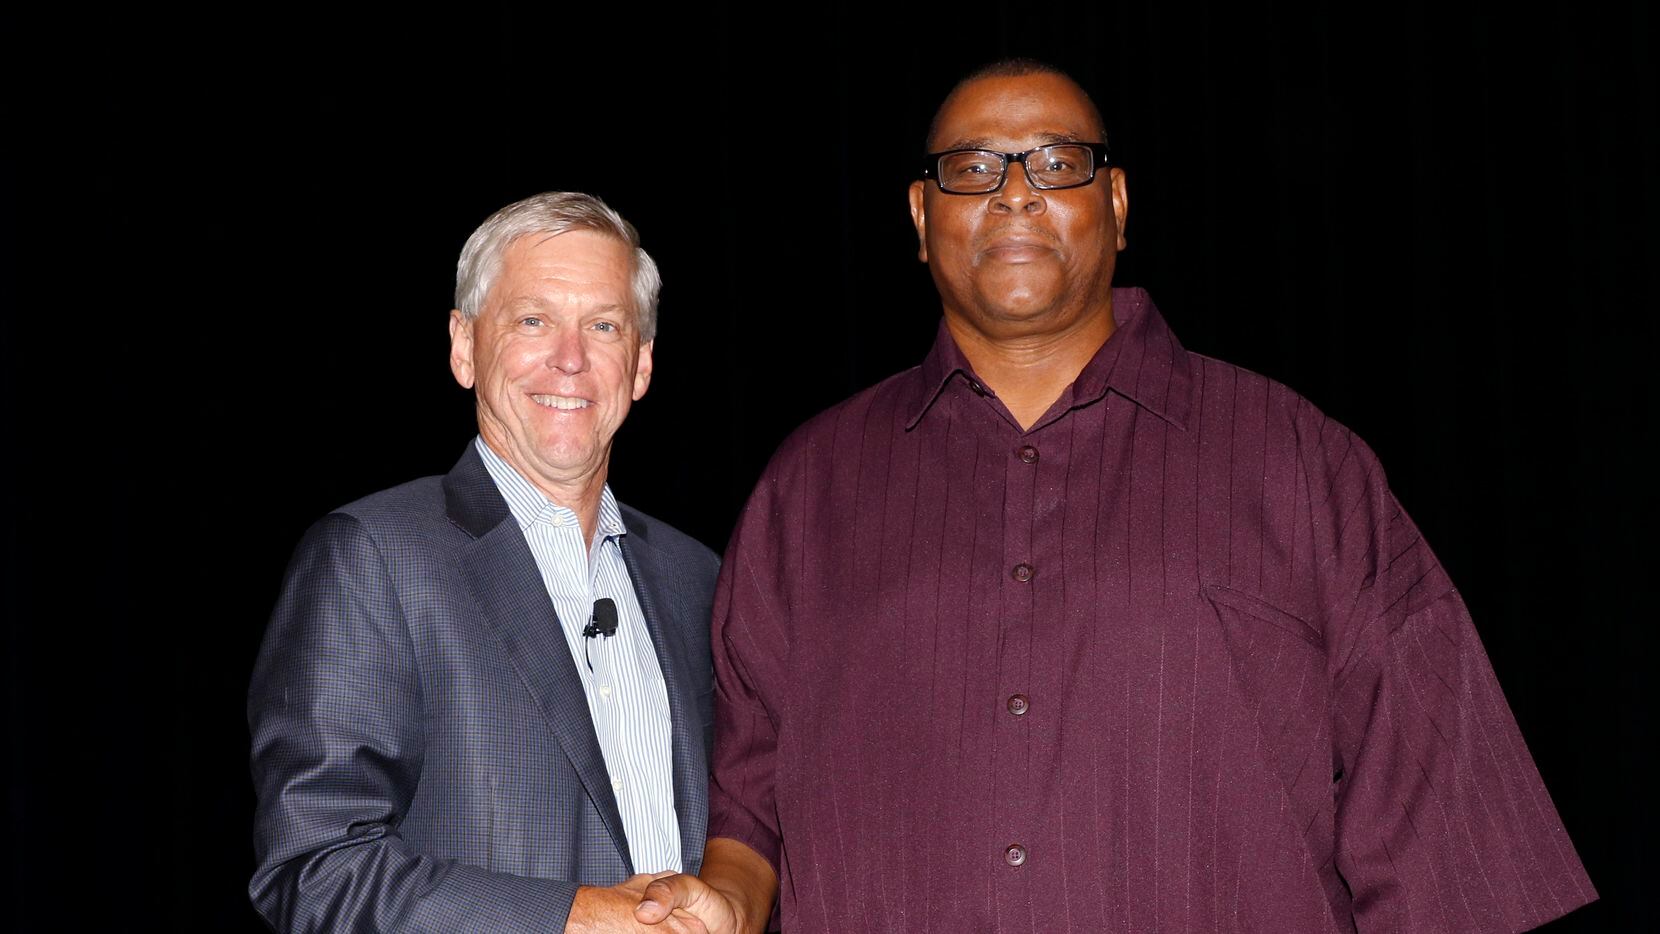 Publisher Jim Moroney (left) honored Thomas Ellison for his 15 years of service to The Dallas Morning News in June 2015.